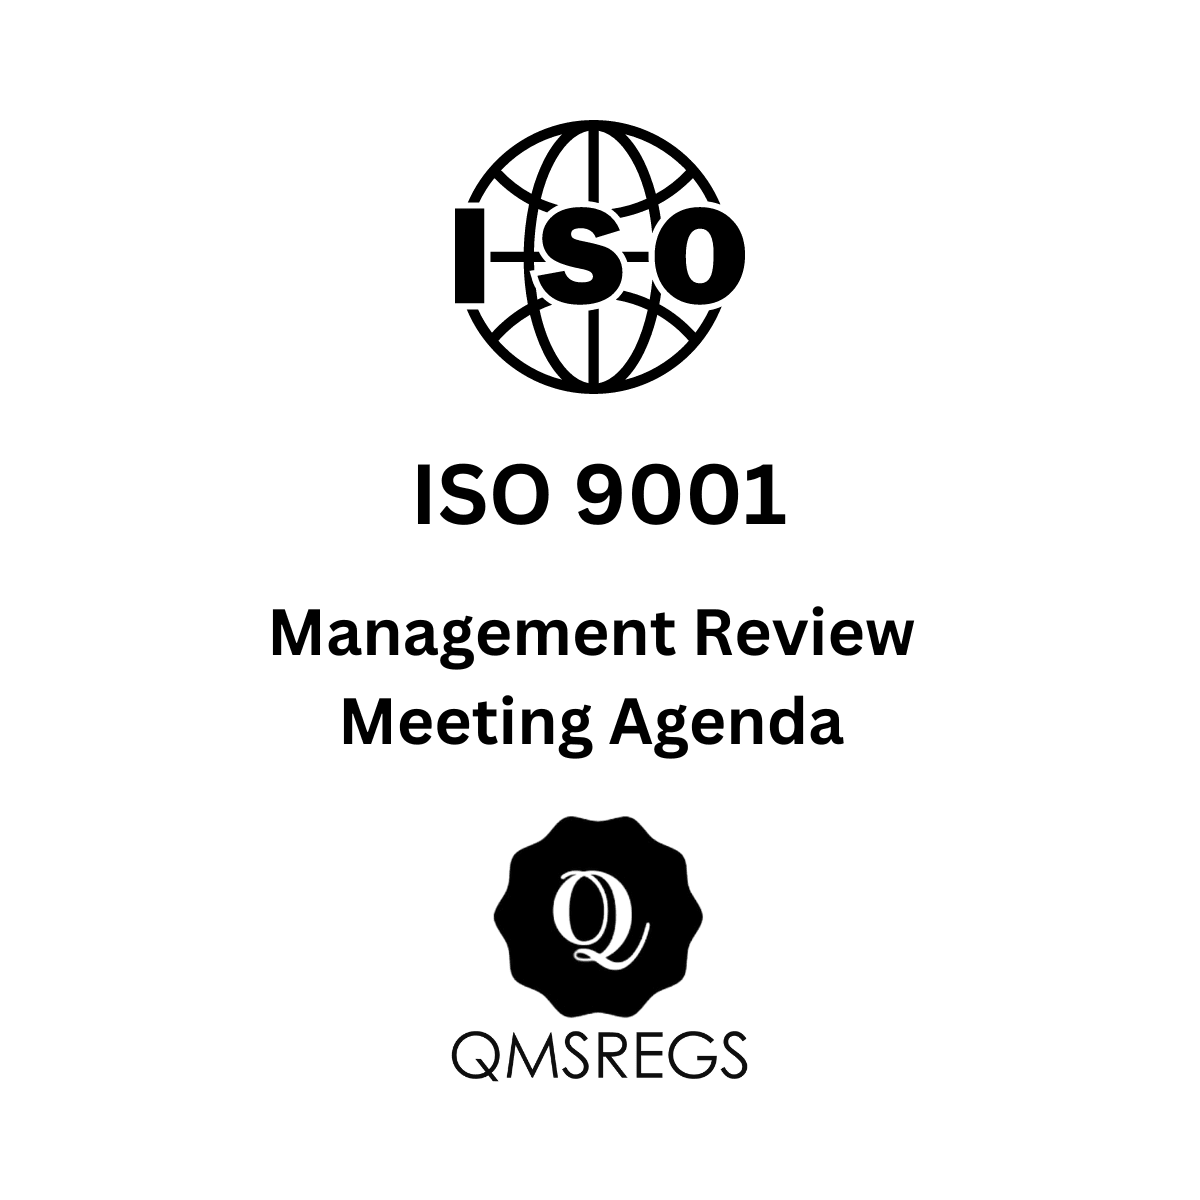 ISO 9001 Management Review Meeting Agenda Template